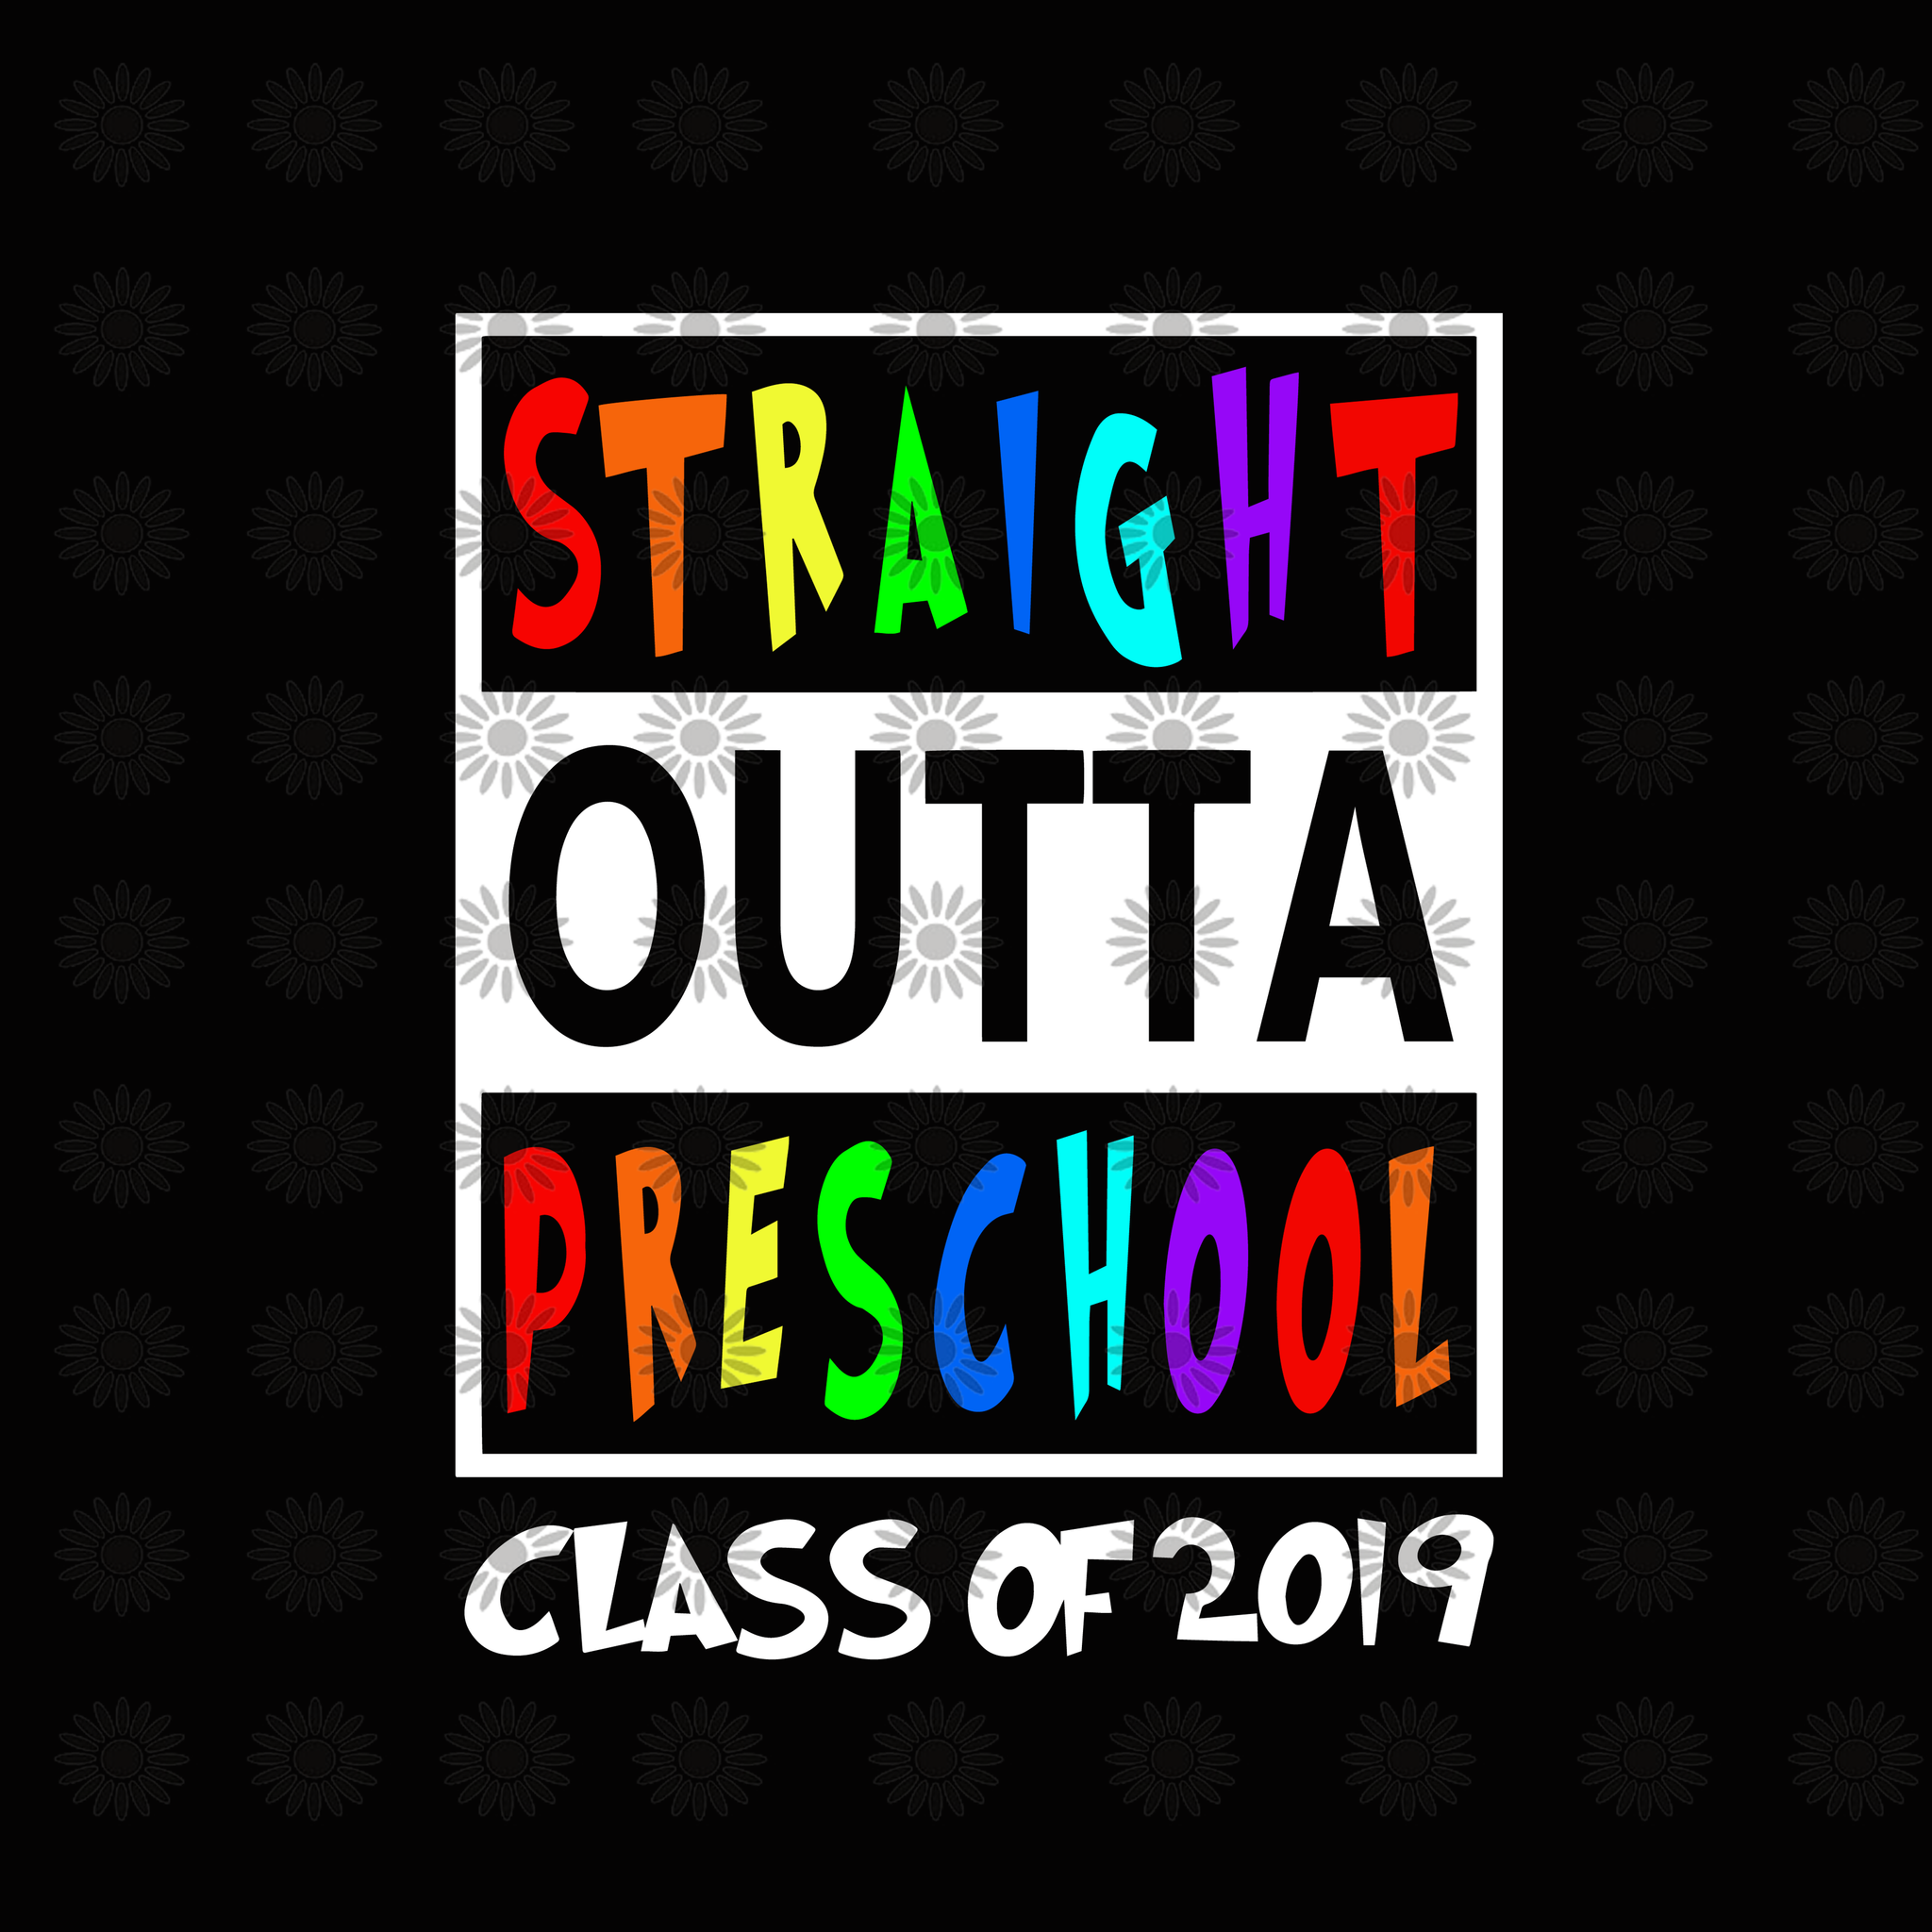 Straight outta preschool class of 2019 svg, Straight outta preschool class of 2019, school svg, funny quotes svg, png, eps, dxf file